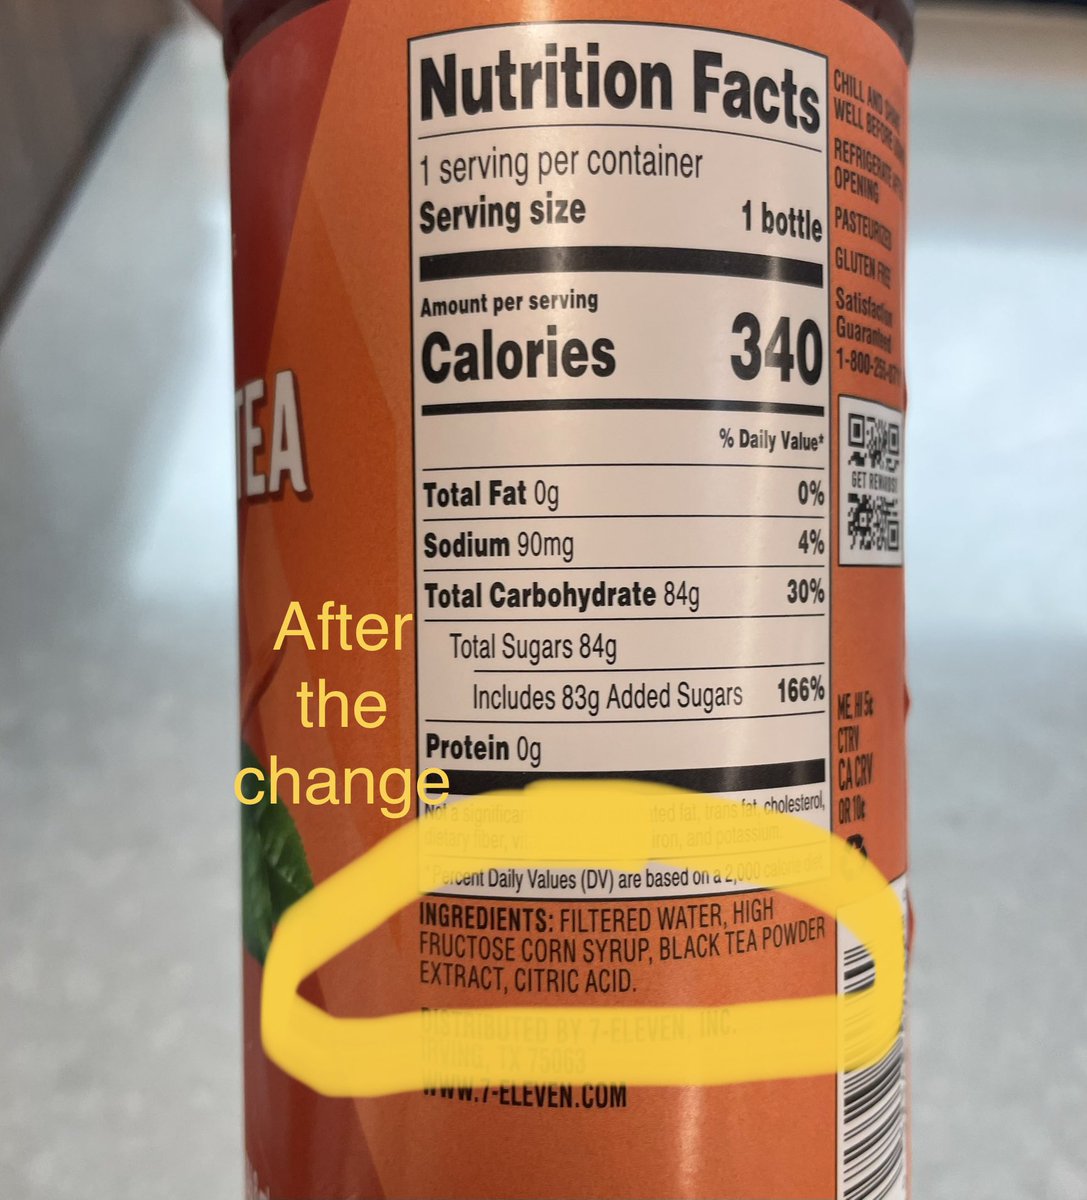 @7eleven I am so disappointed that you changed the ingredients of your Sweet Tea. You replaced the real sugar with high fructose corn syrup. This is “New Coke” level stupid. Obviously you did this to save a few bucks and extend the shelf life. Unacceptable. Please change it back.